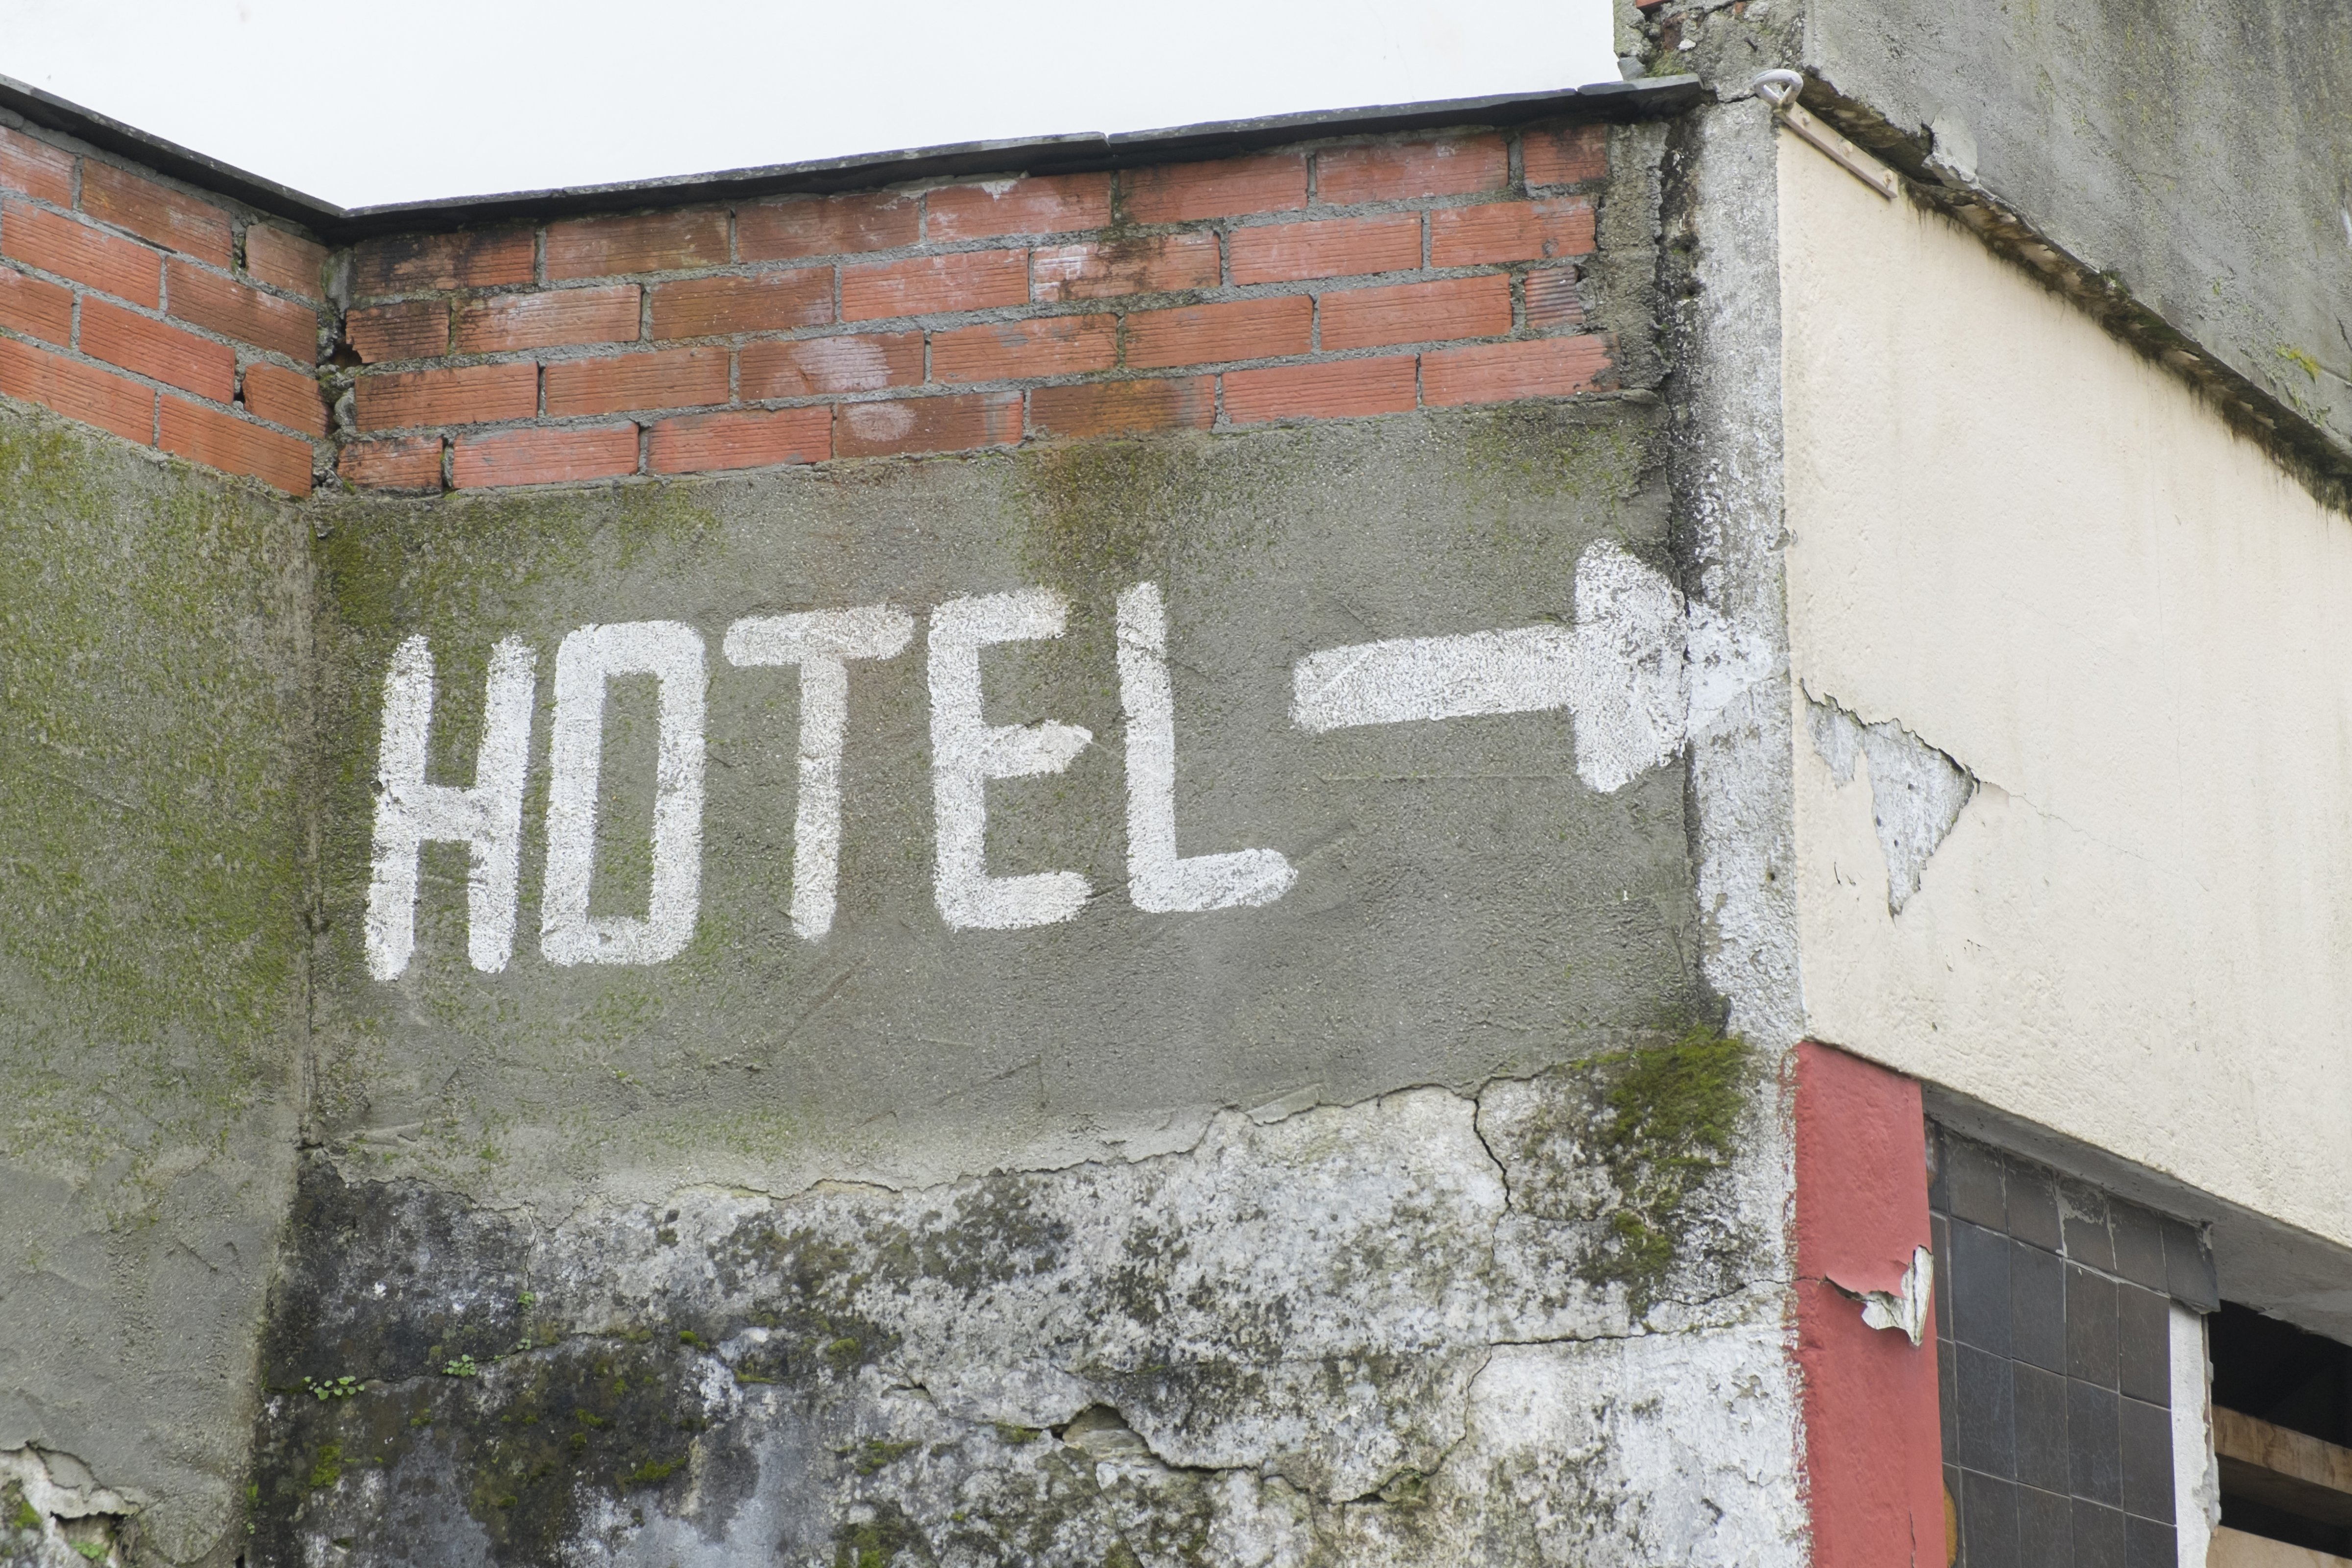 Painted sign indicatiing an hotel